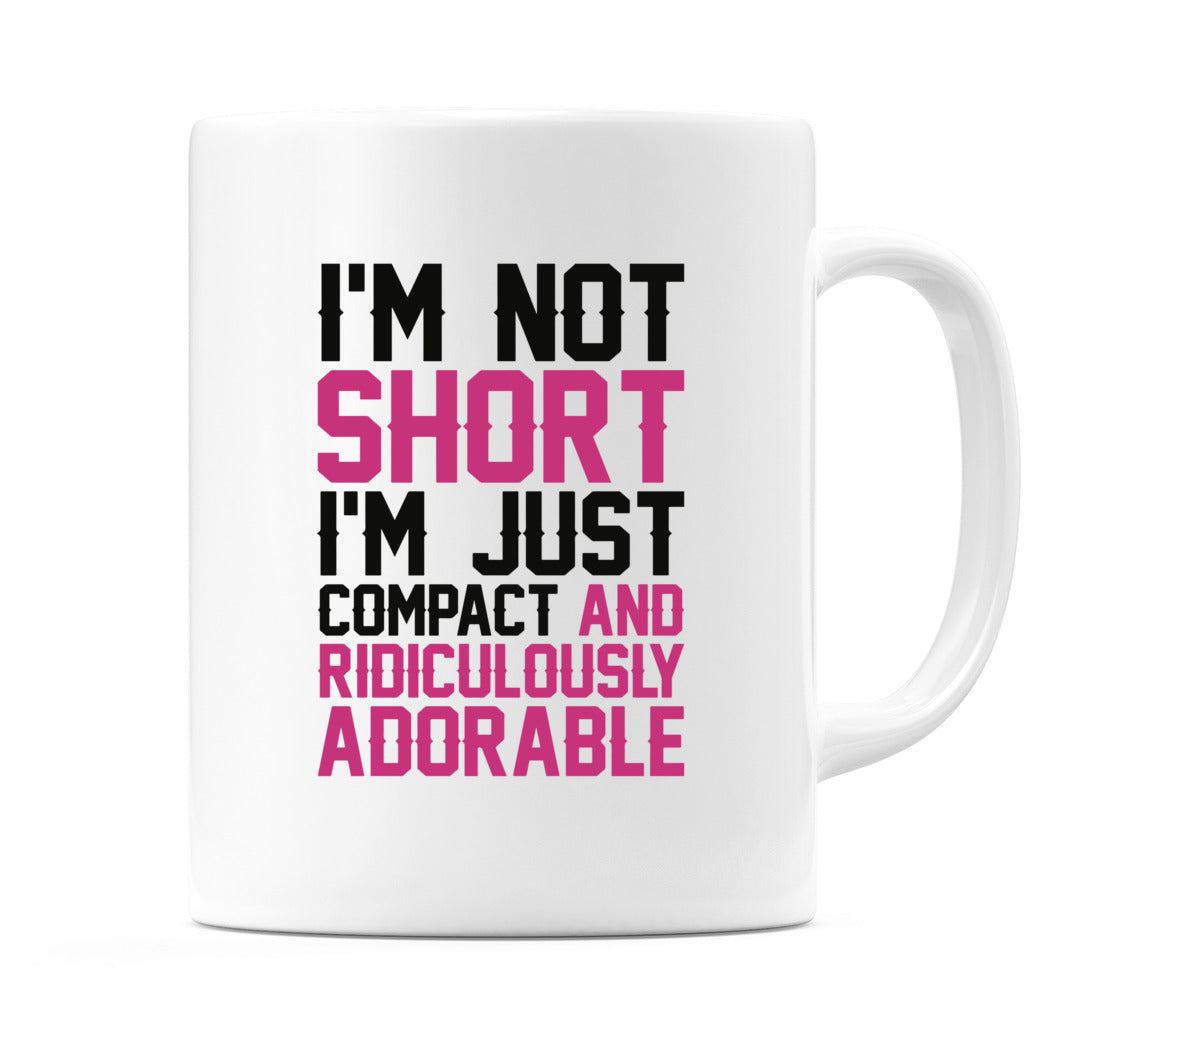 I'm Not Short I'm Just Compact And Ridiculously Adorable Mug